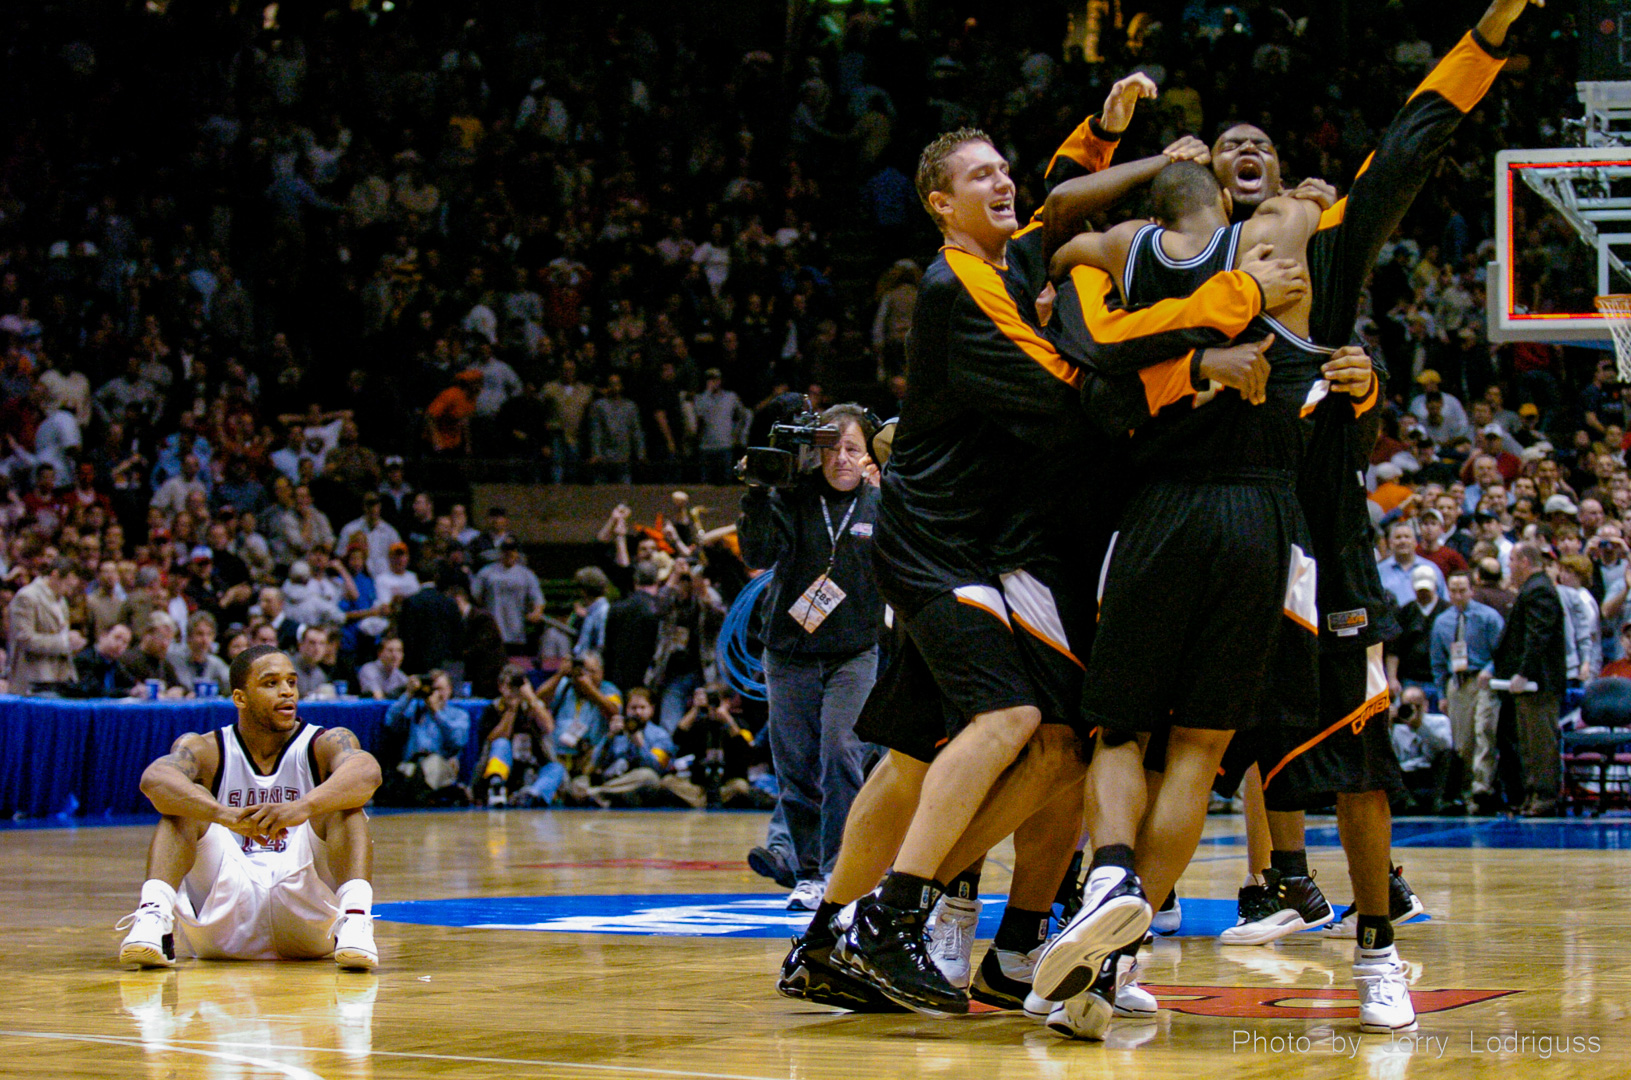 St. Joes Hawks' Jameer Nelson sits on the court dejected as the Oklahoma State Cowboys celebrate their win over the Hawks in the east regional finals of the NCAA men's basketball tournament on Saturday March 27, 2004. Nelson had missed the last shot for the Hawks, who had not lost a game all year until this final defeat which crushed their dream of going to the Final Four.